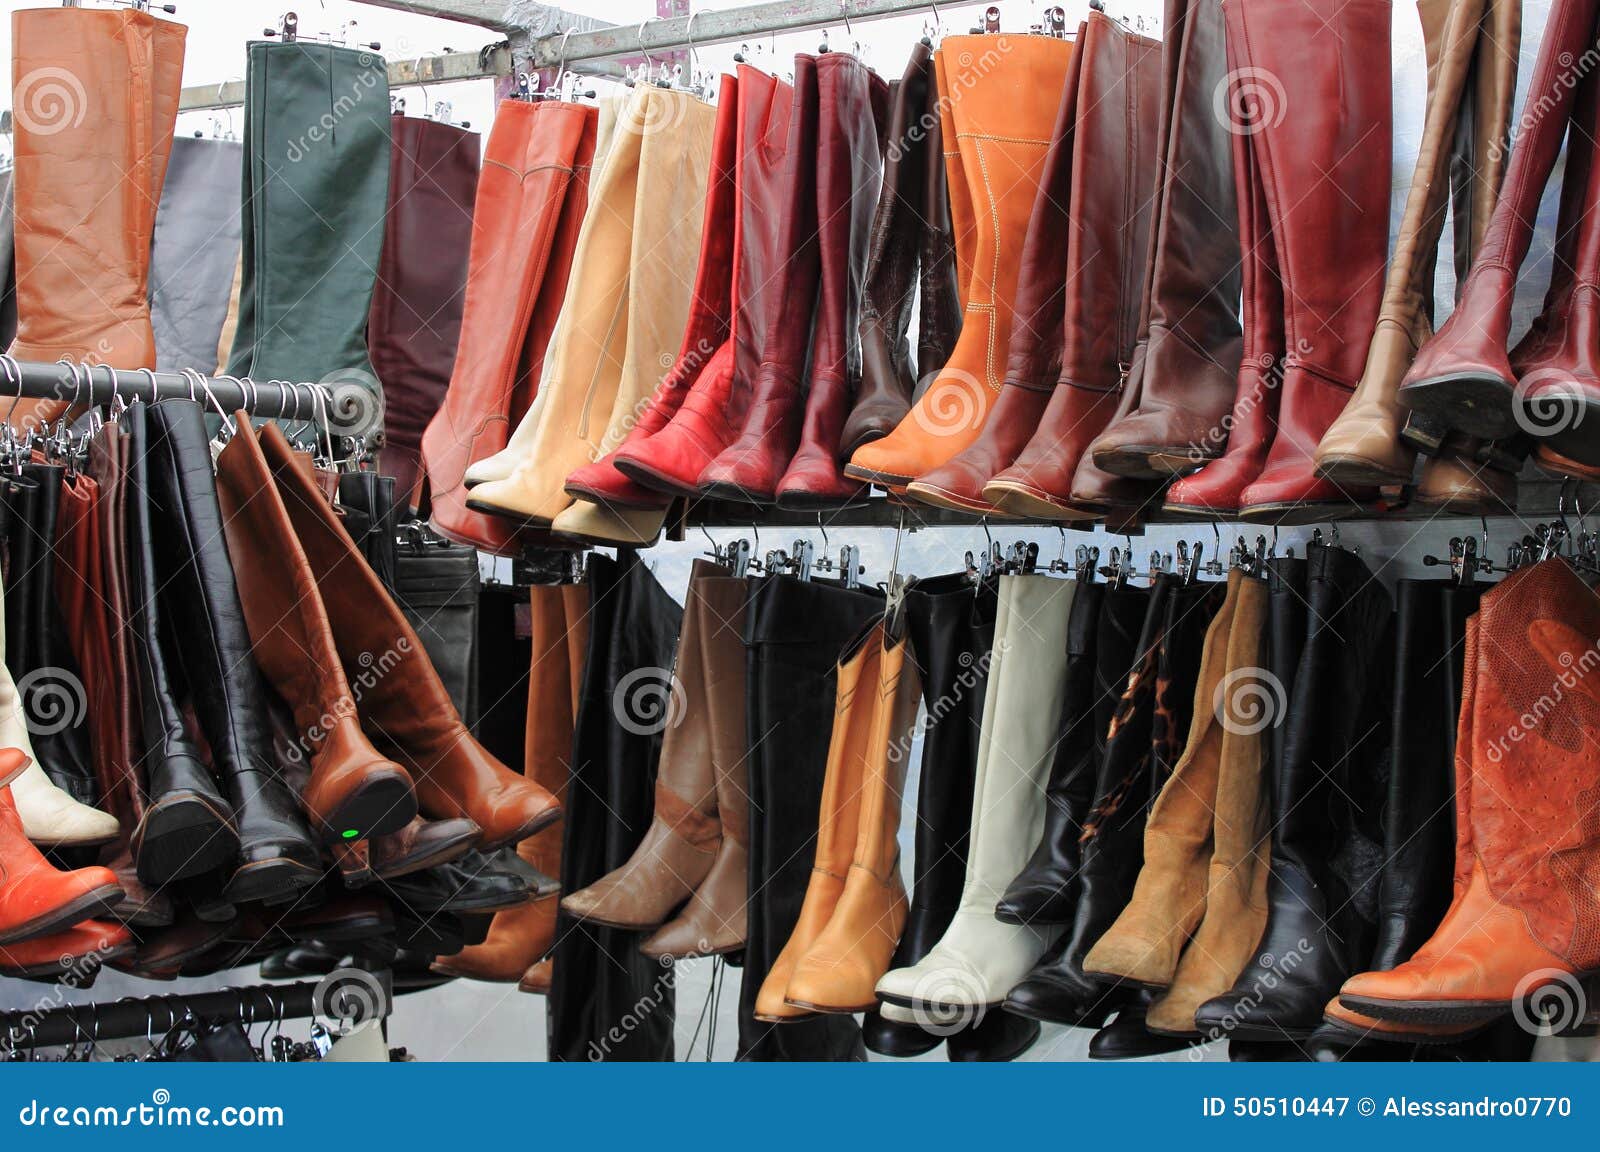 Women boots stock image. Image of collection, cutout - 50510447